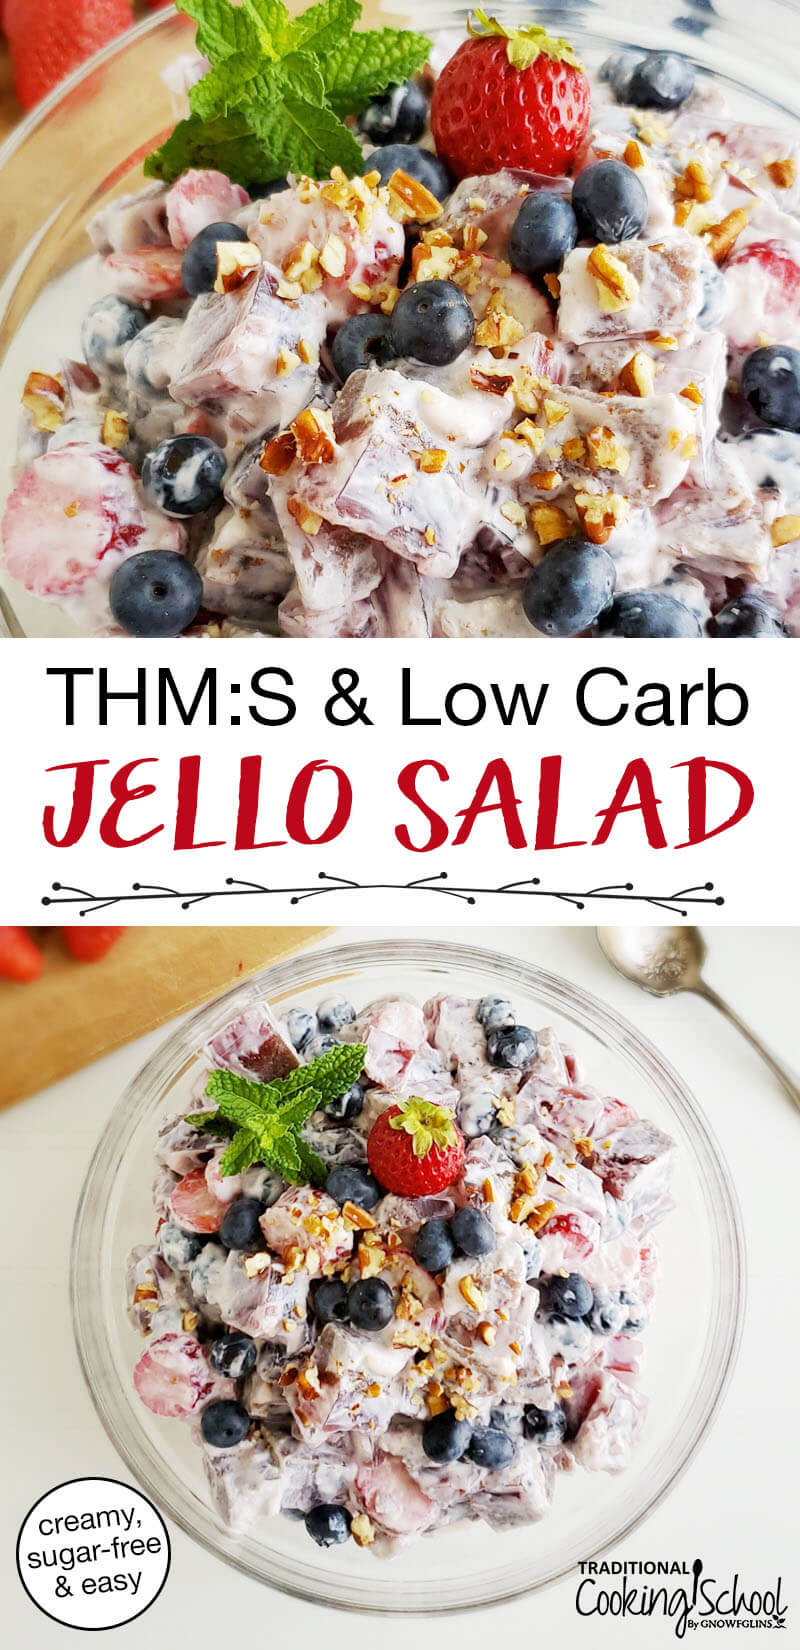 photo collage of healthy jello salad in a clear glass bowl, garnished with a fresh strawberry and mint, with text overlay: "THM:S & Low Carb Jello Salad (creamy, sugar-free & easy)"